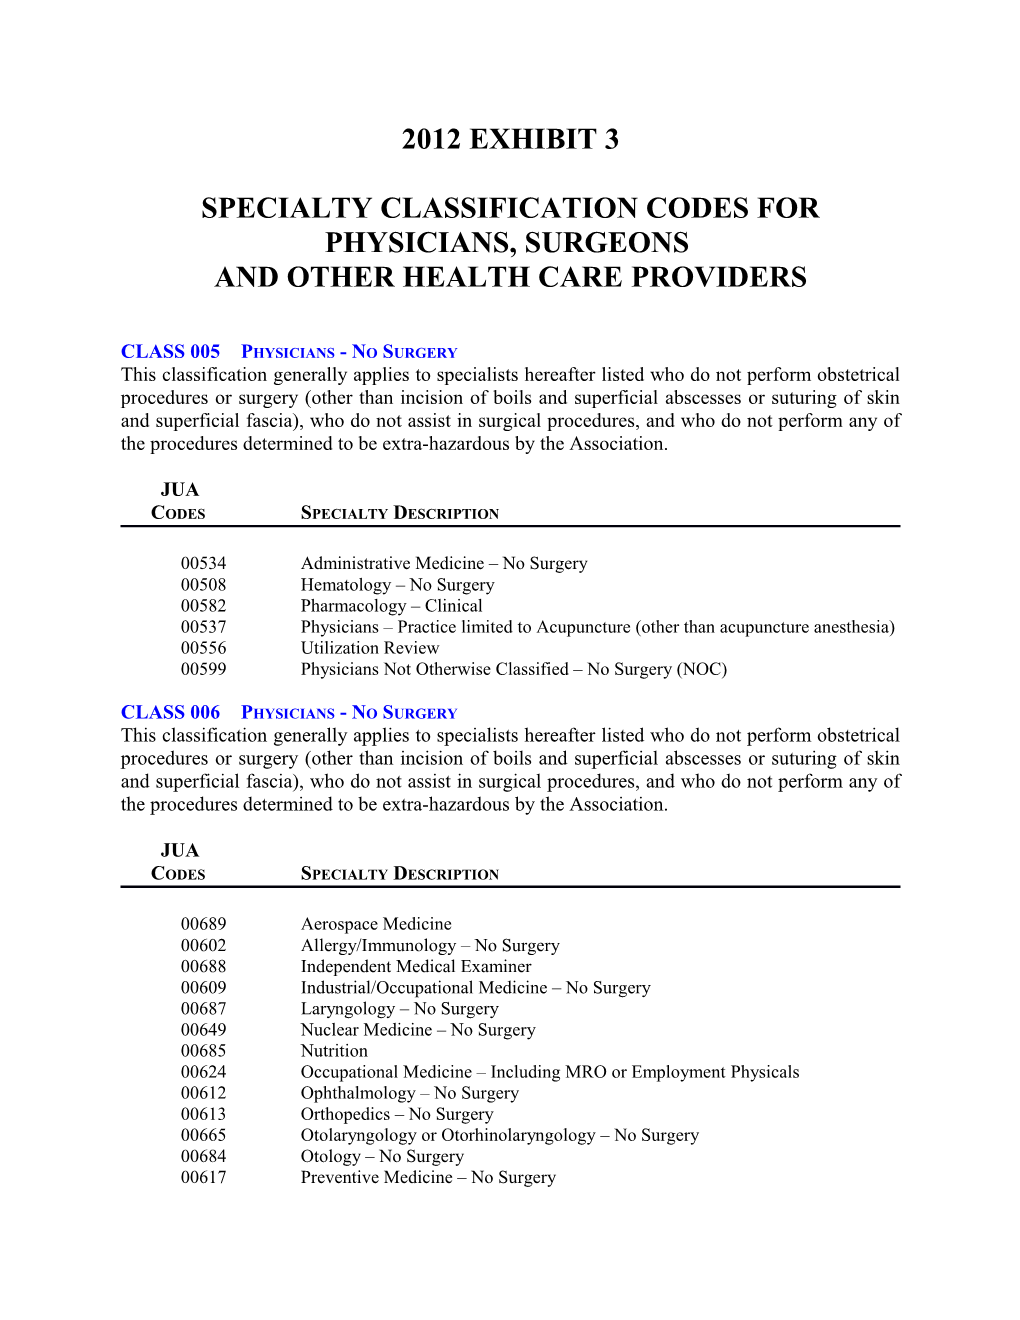 Specialty Classification Codes for Physicians, Surgeons